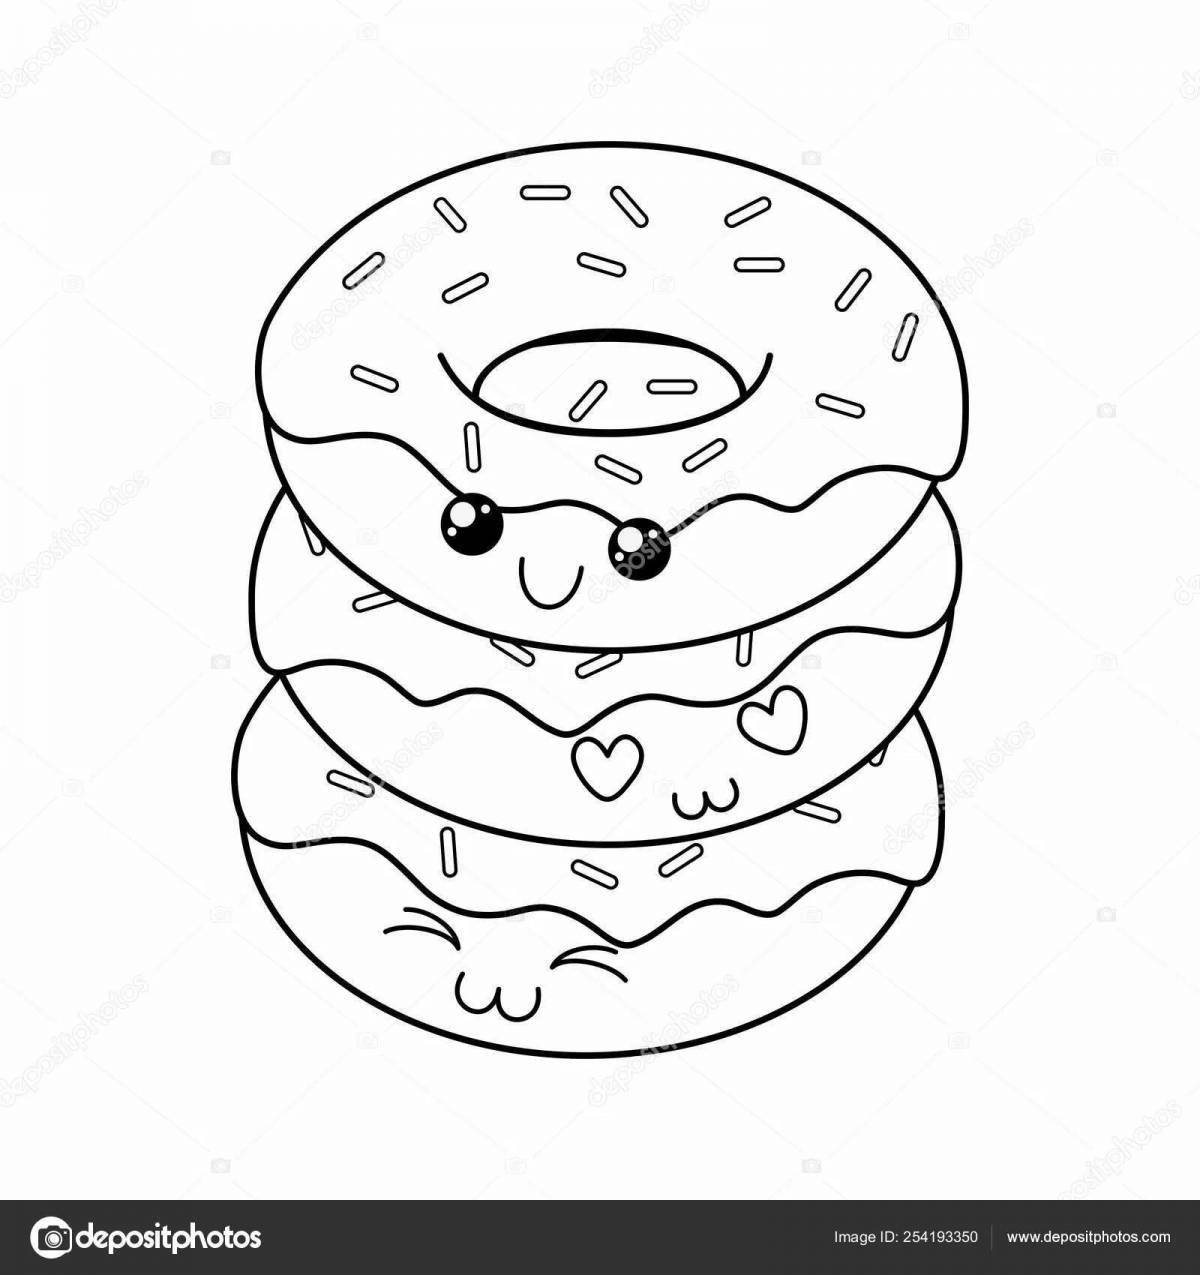 Fun coloring donut for girls